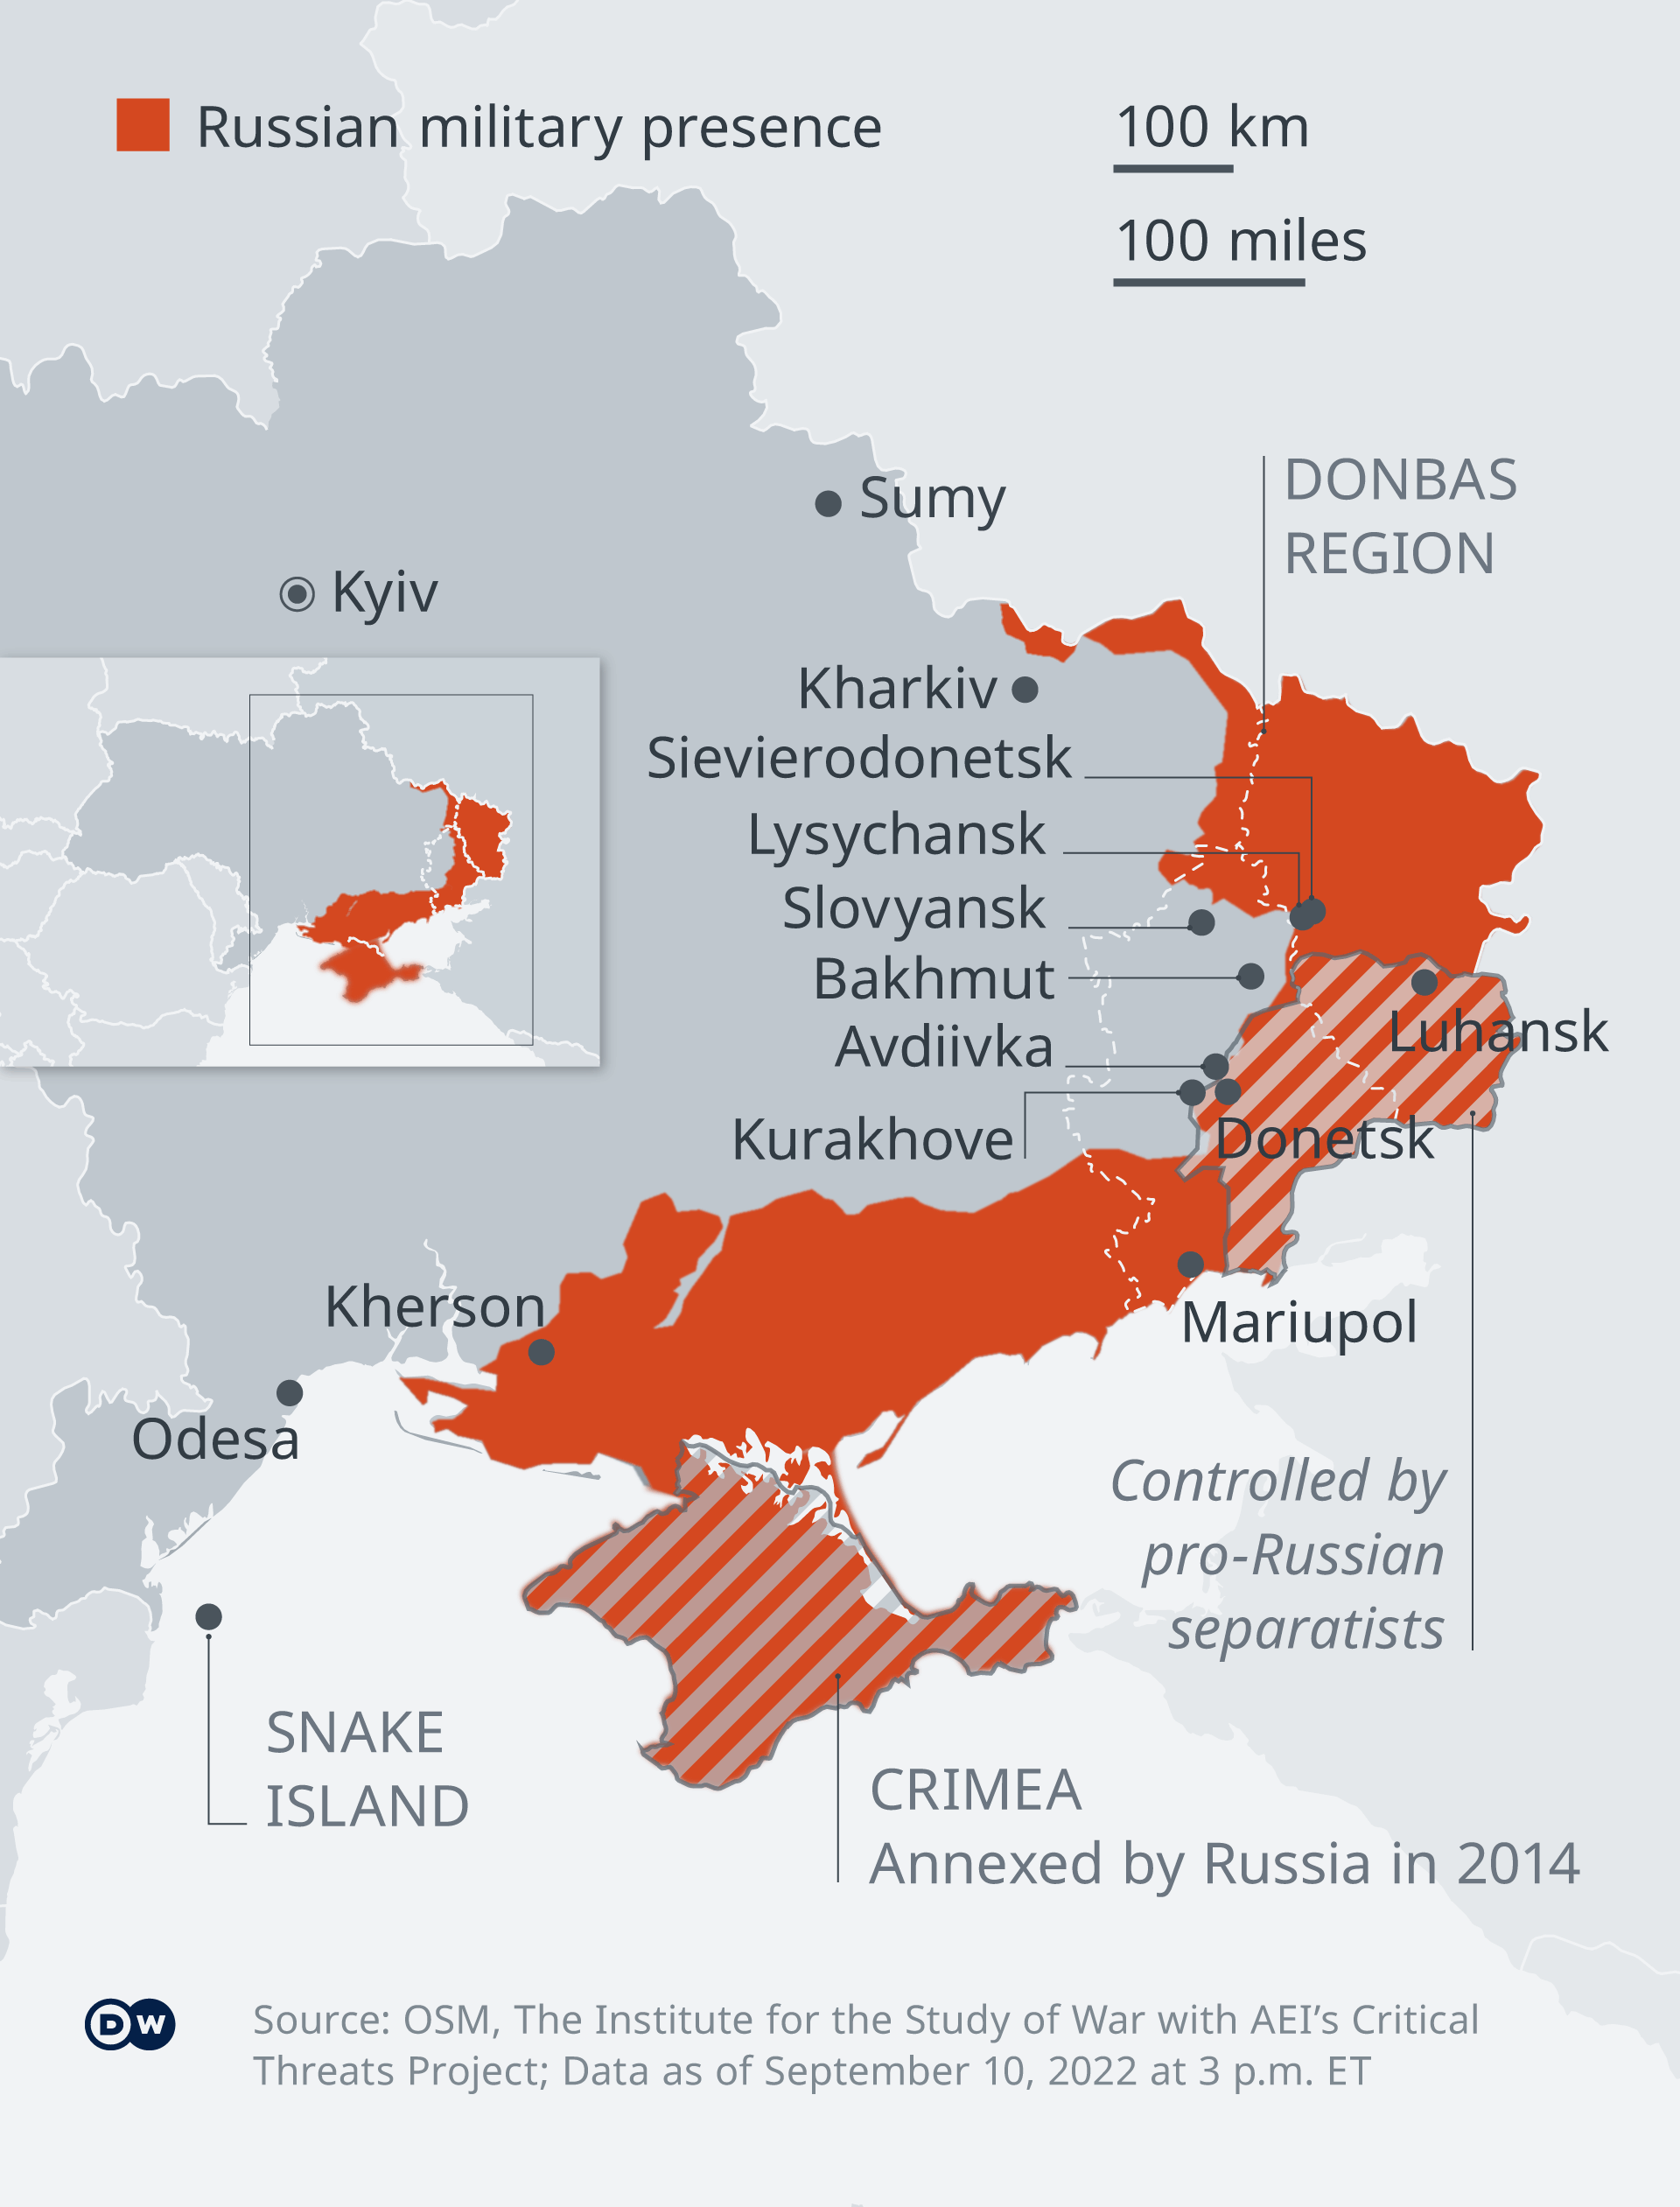 A map showing the Russian military presence in Ukraine as of June 29, 2022